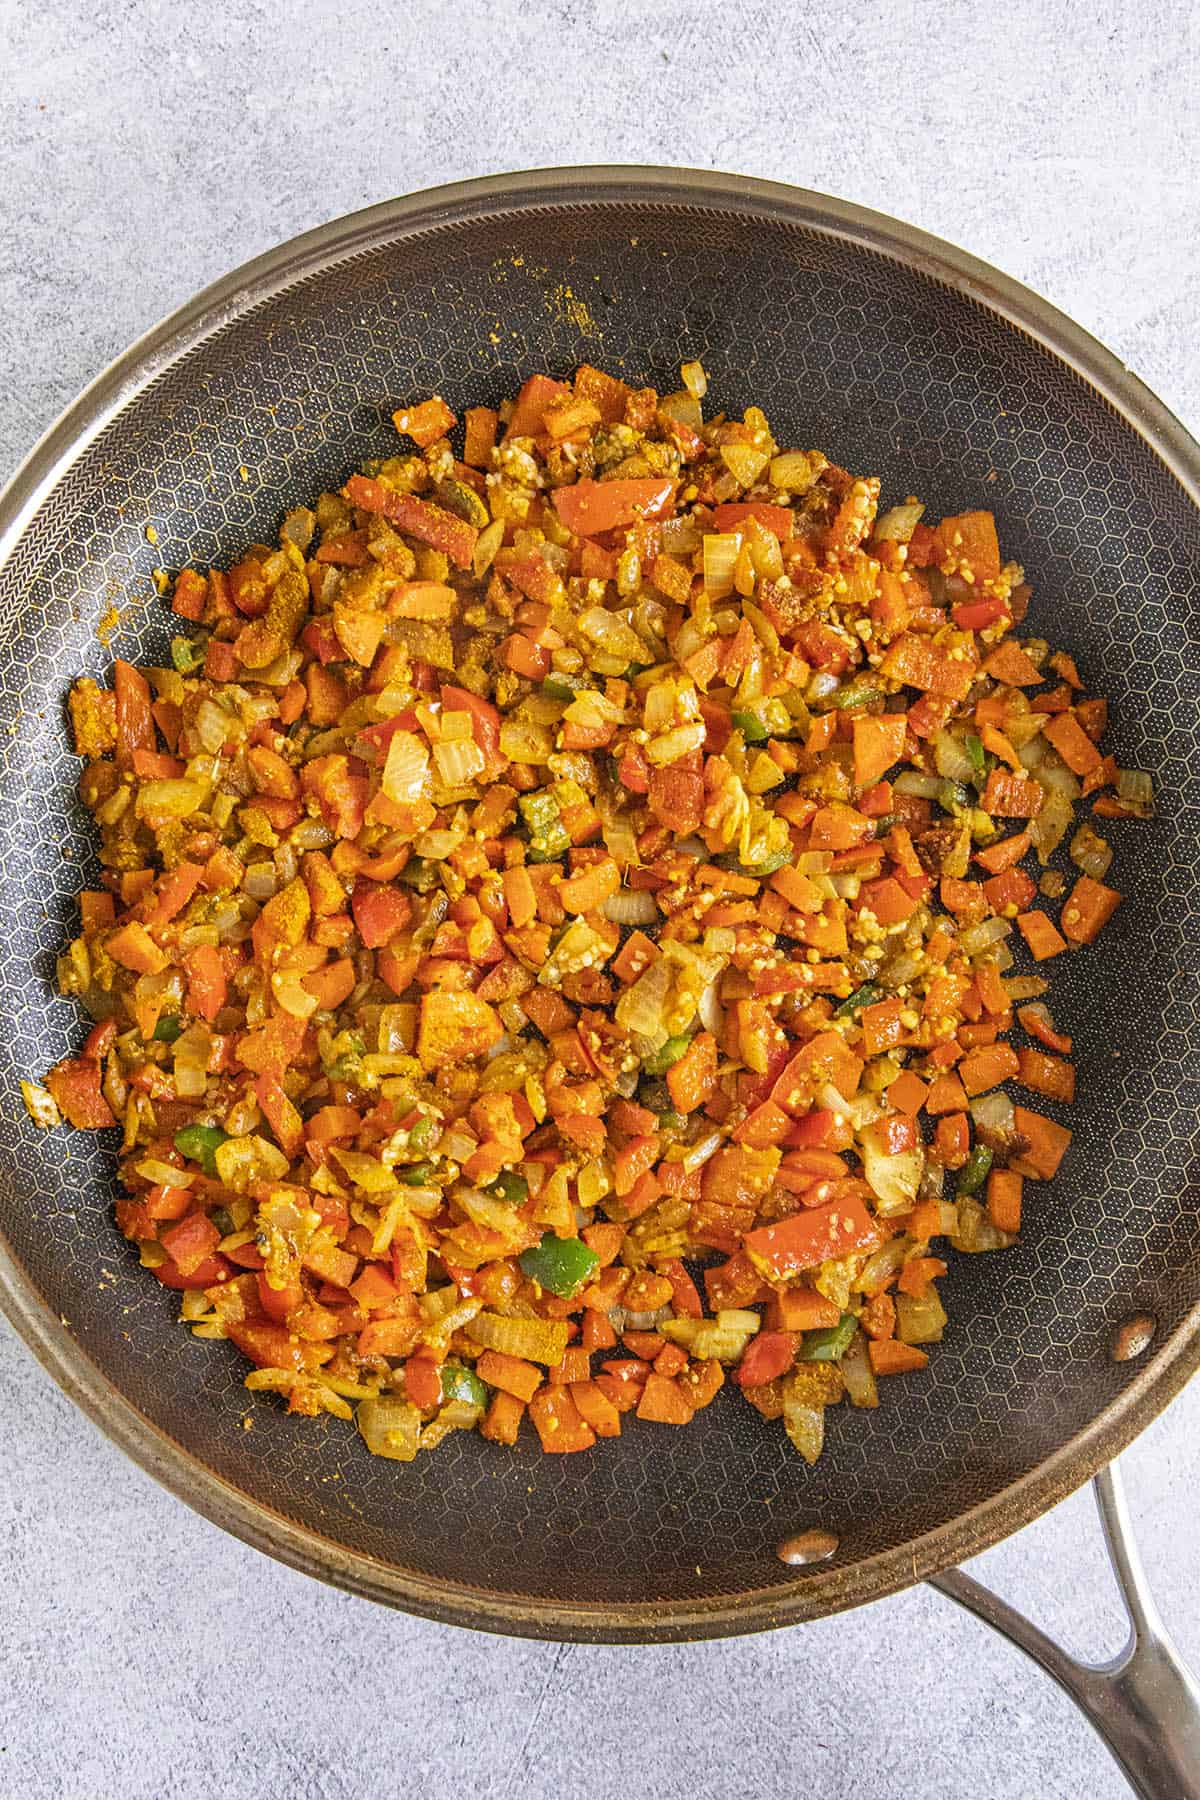 Cooking vegetables and spices in a pan to make Curried Rice